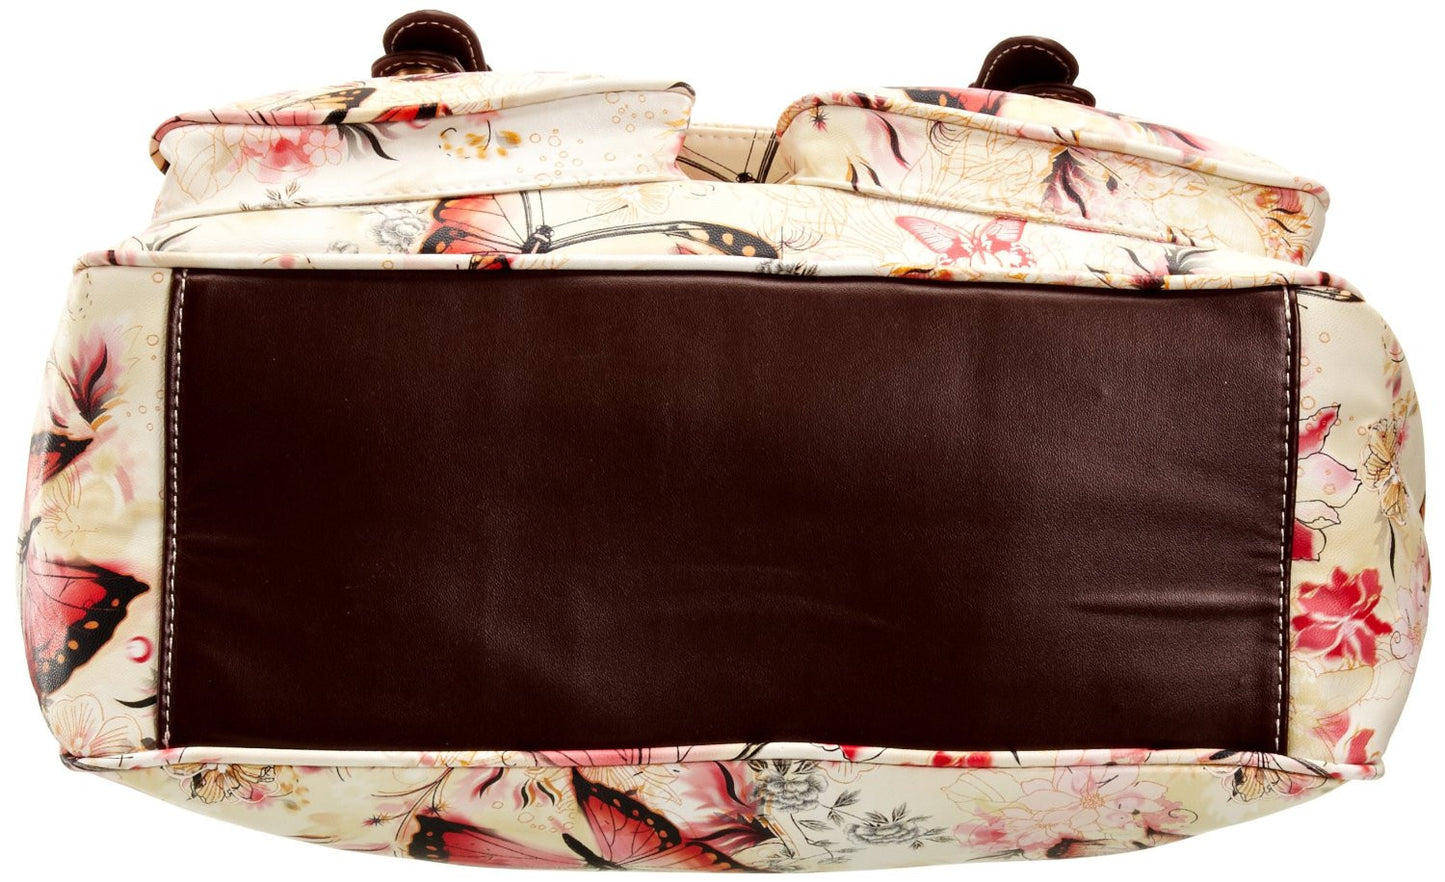 Swanky Swans Maple Butterfly Print Double Pocket Satchel Off White Perfect for Back to school!